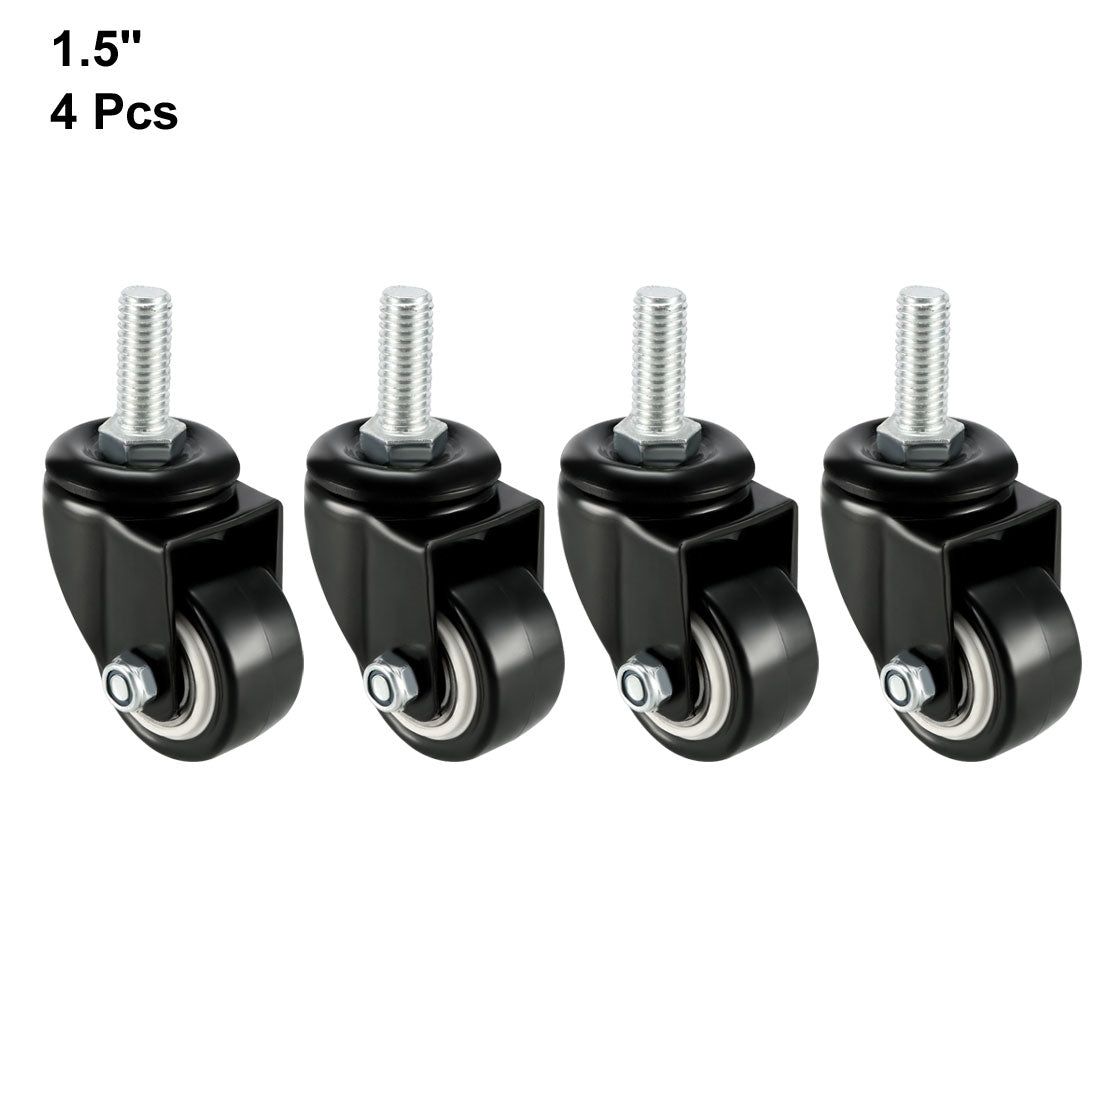 Uxcell Uxcell Swivel Casters 1.5 Inch PU M10 x 25mm Threaded Stem Swivel Caster Wheels 110lb Capacity Each , 4 Pcs